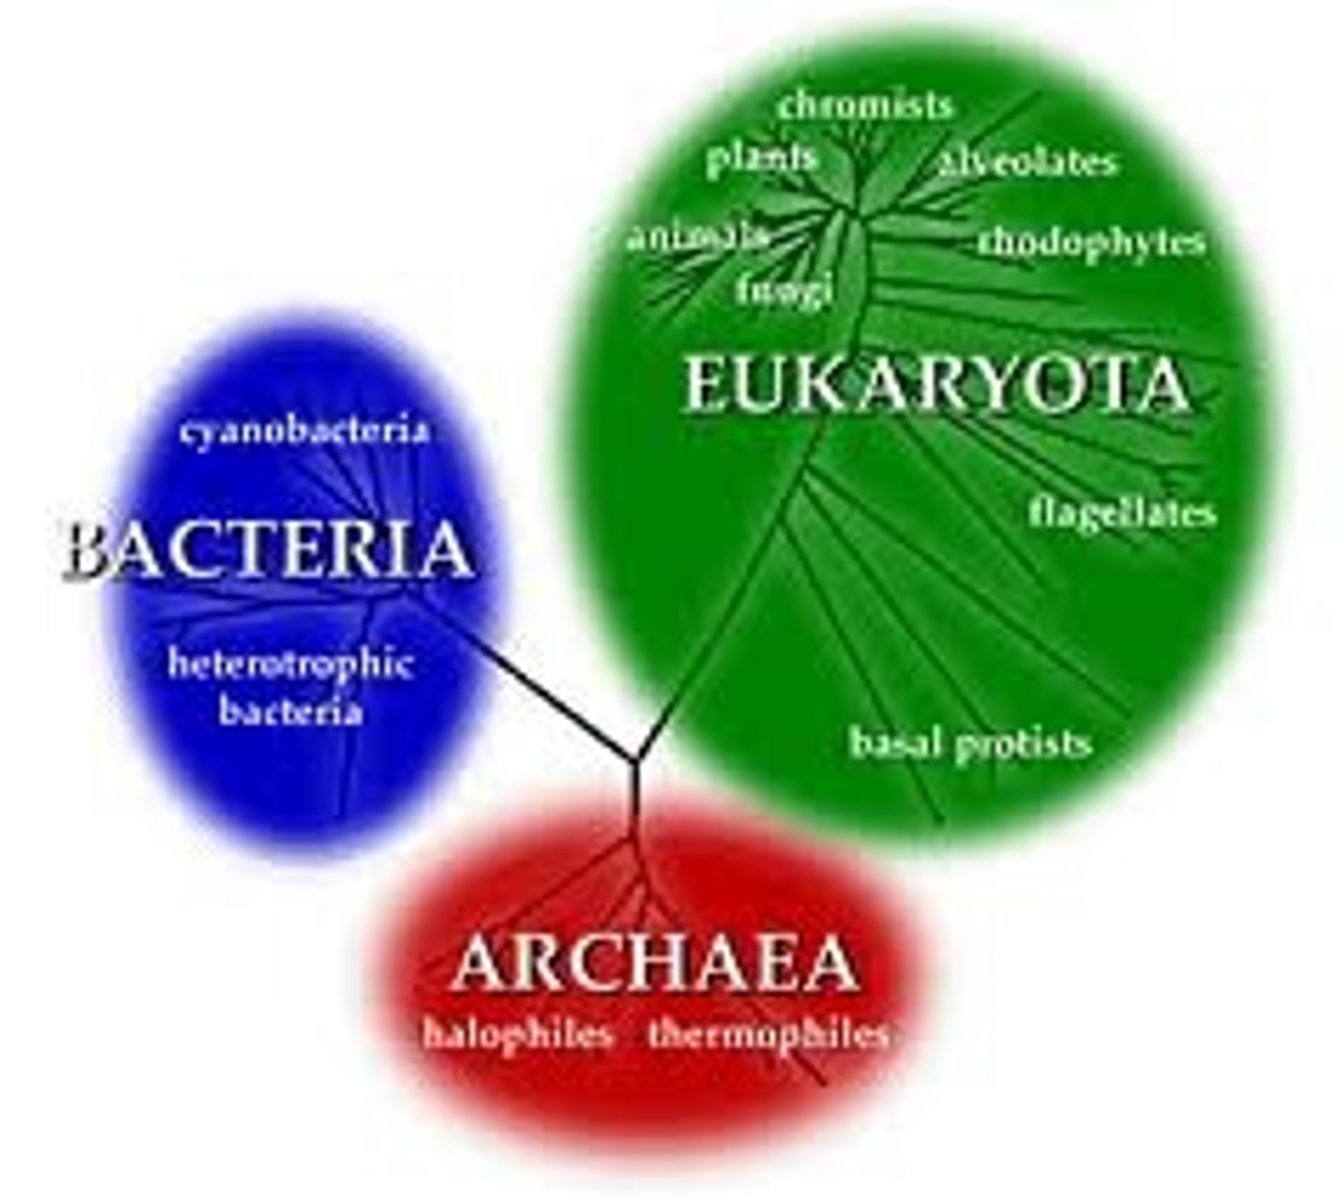 <p>1.) Archaea</p><p>-prokaryotes, hostile environments, closer relatives to eukaryotes</p><p>2.) Bacteria</p><p>-prokaryotes, cyanobacteria</p><p>3.) Eukaryote.</p><p>-Protists, Fungi, Plants, Animals</p><p>The first two are all prokaryotic microorganisms, or single-celled microbes whose cells have no nucleus.</p>